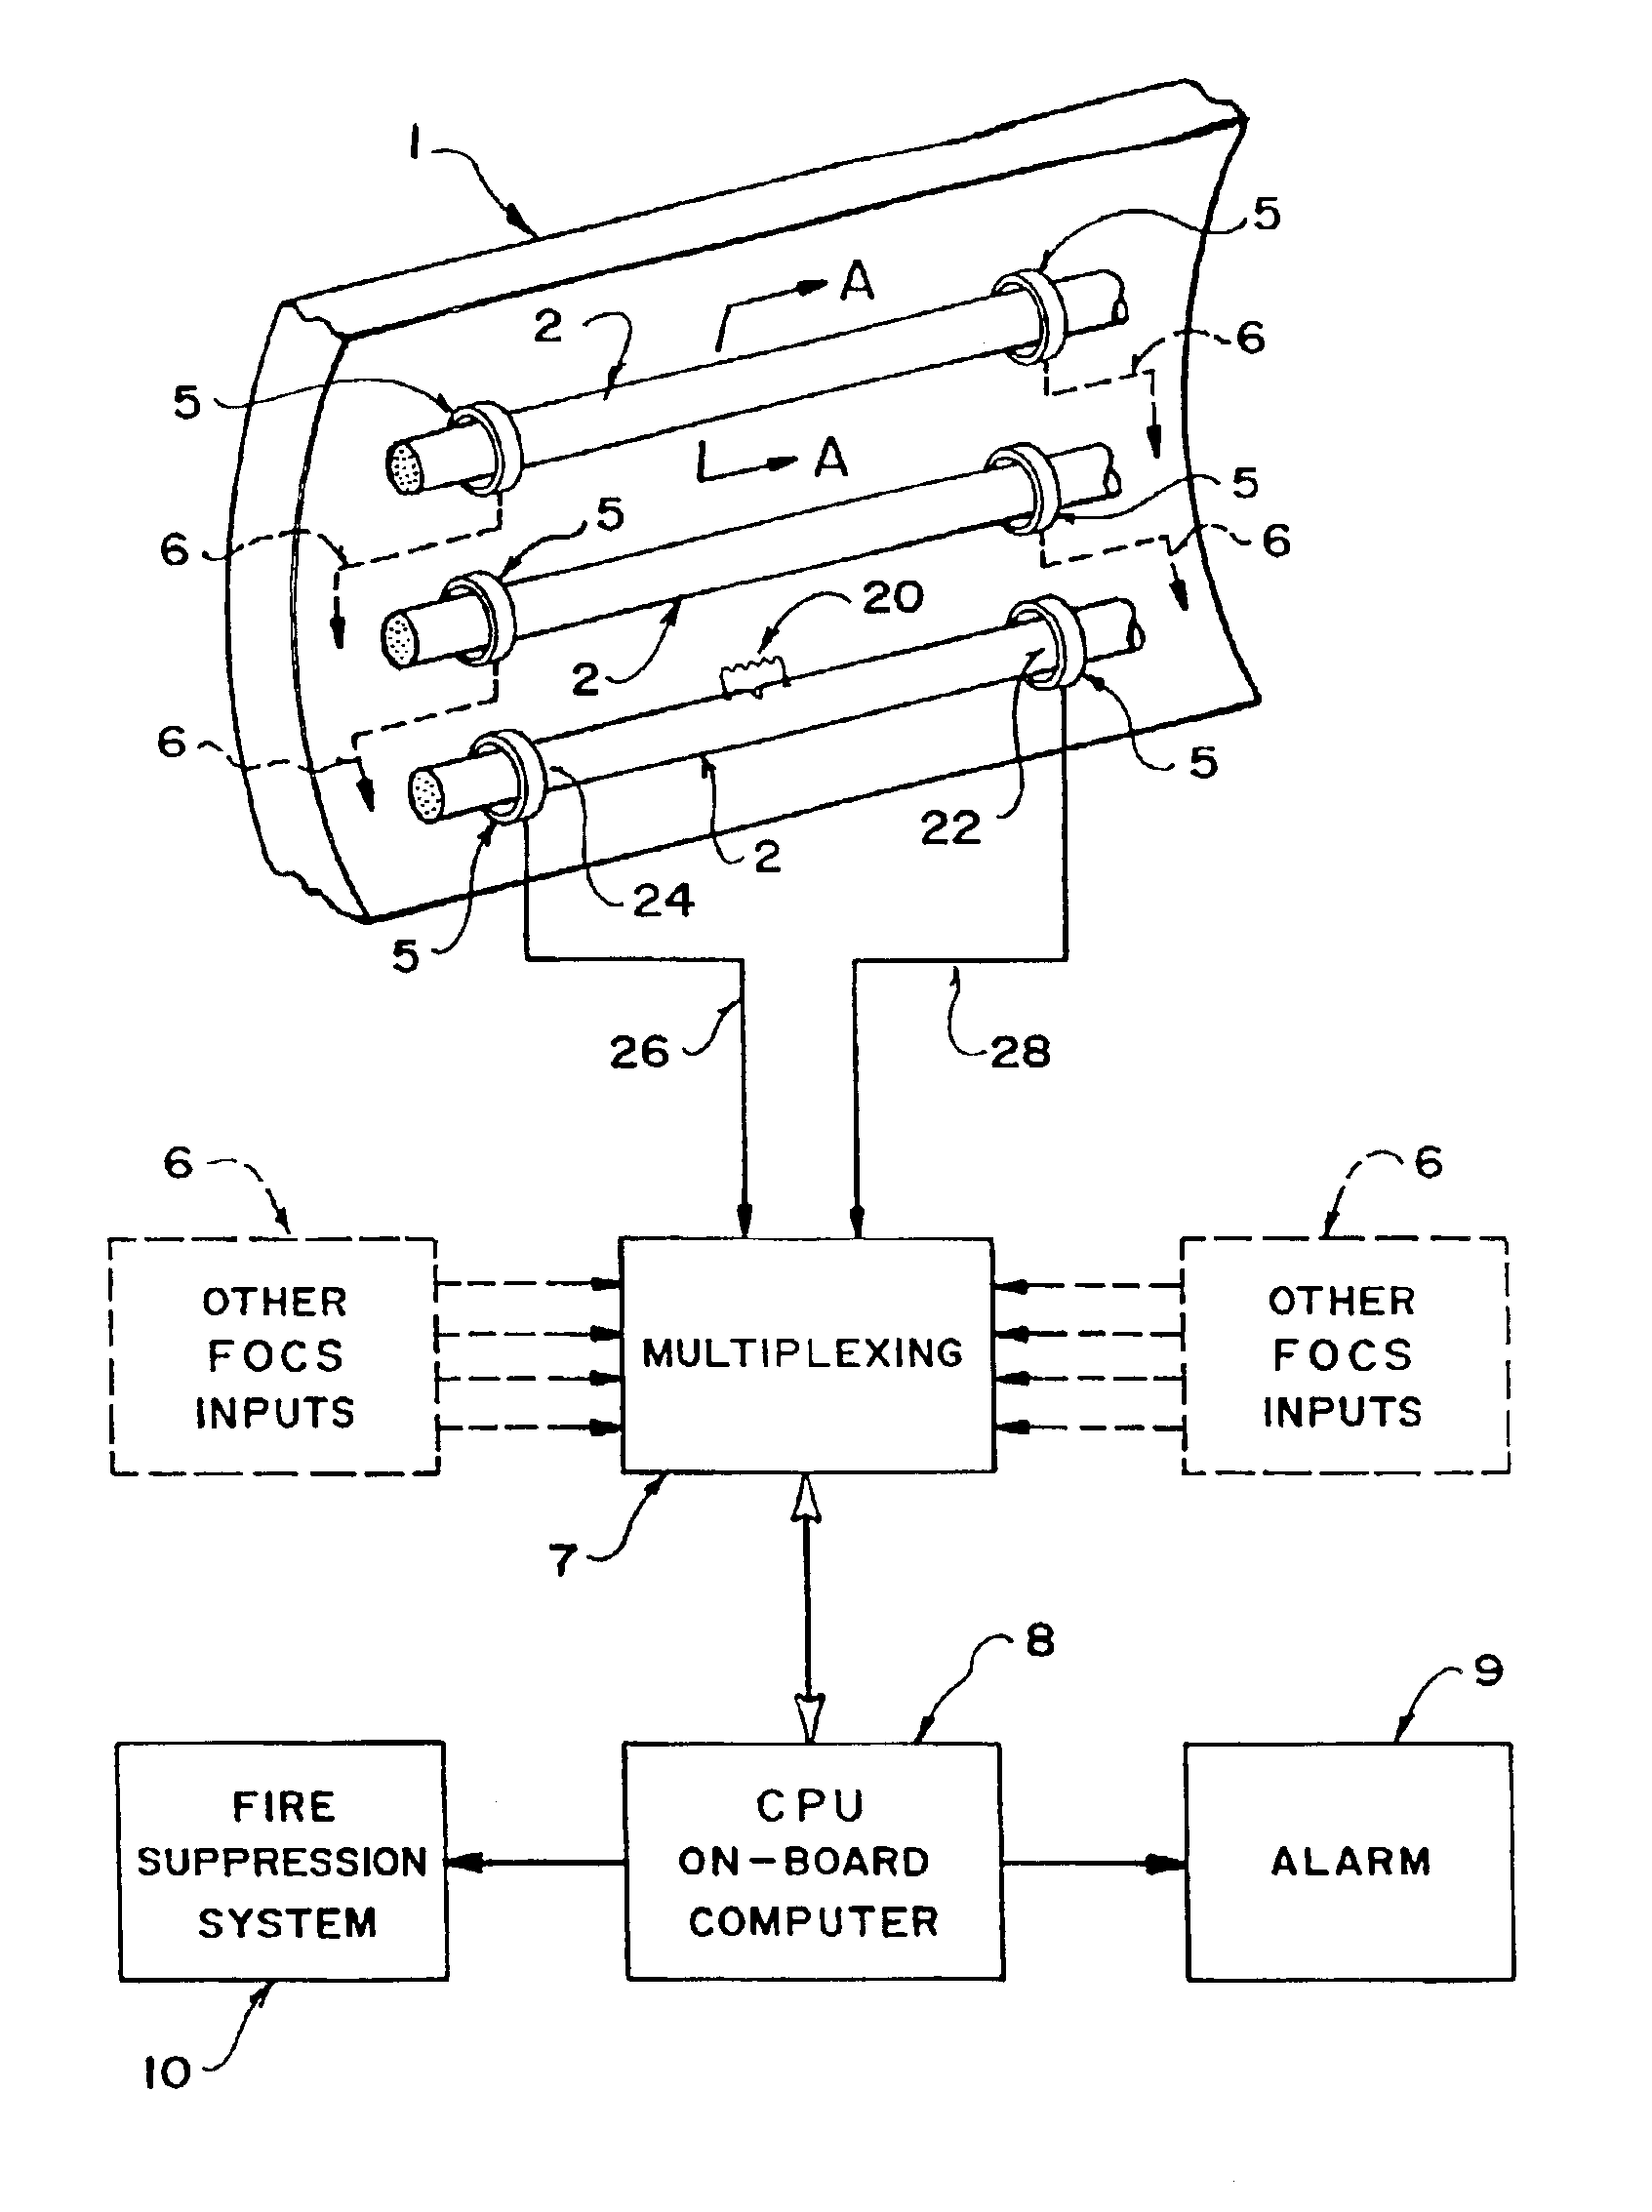 Method for diagnosing degradation in aircraft wiring